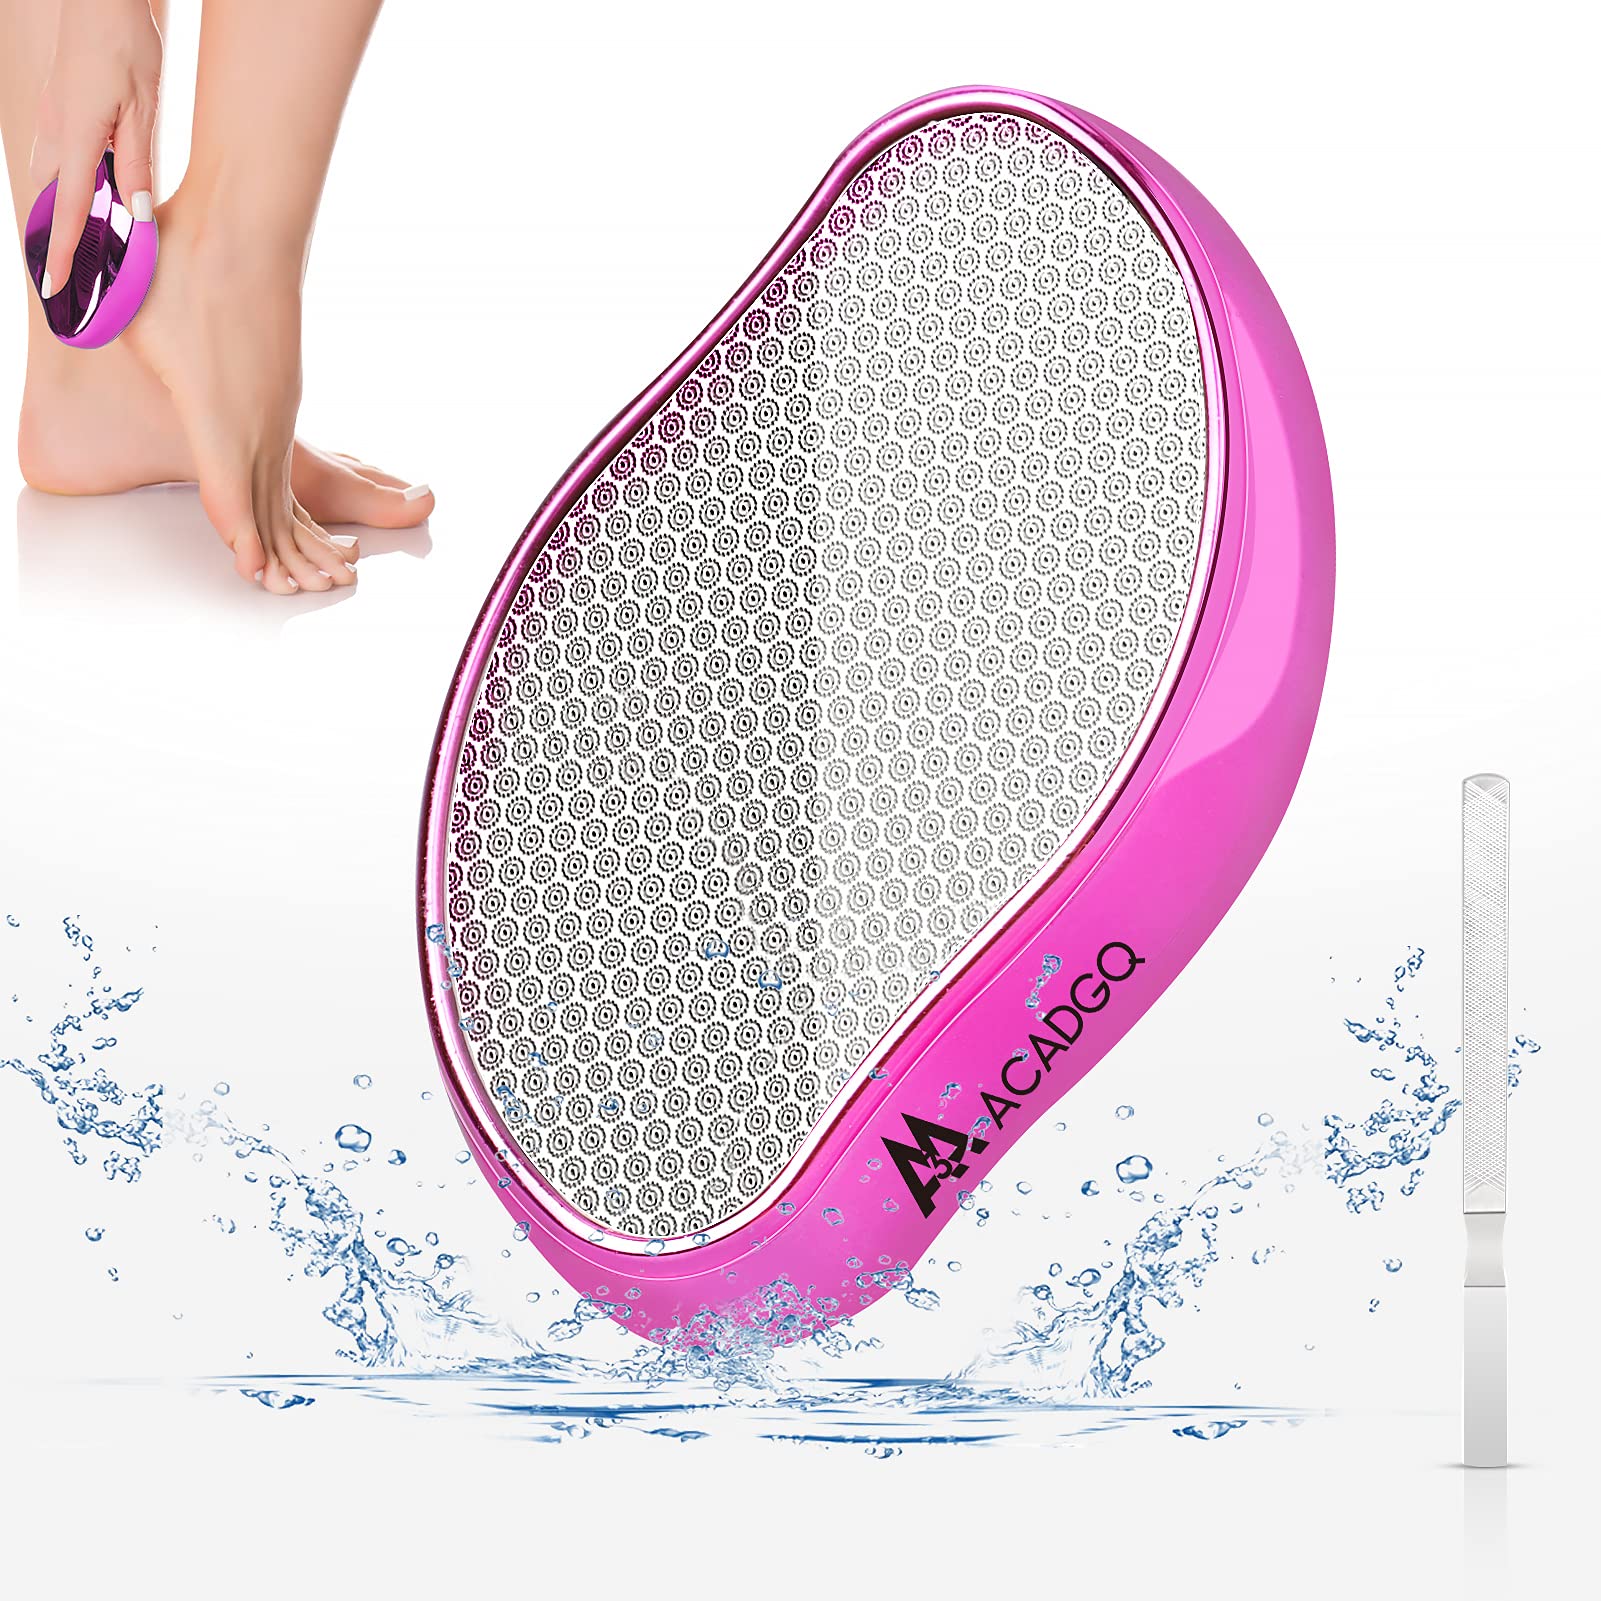 Nano Glass Foot File for Hard Skin, 2 in 1 Wet & Dry Pedicure Foot Grater, Quick, Safe and Effective Callus Dead Skin Remover for Feet (Rose)